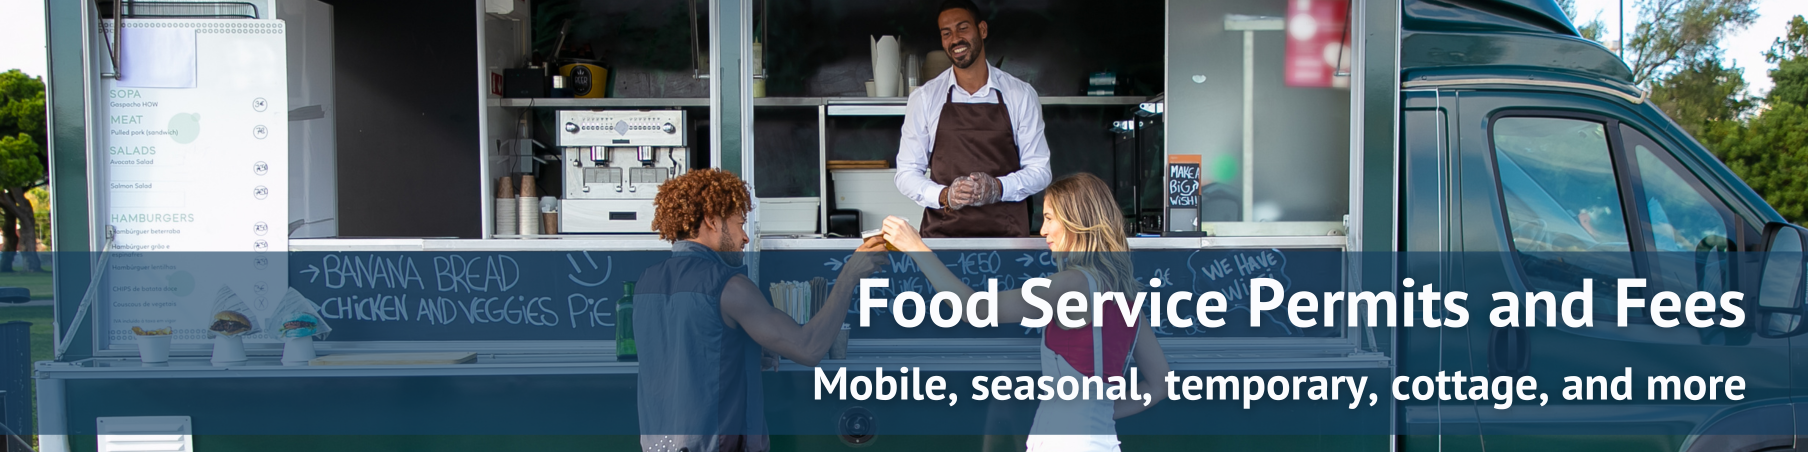 Homepage Food Service Banner (1).png